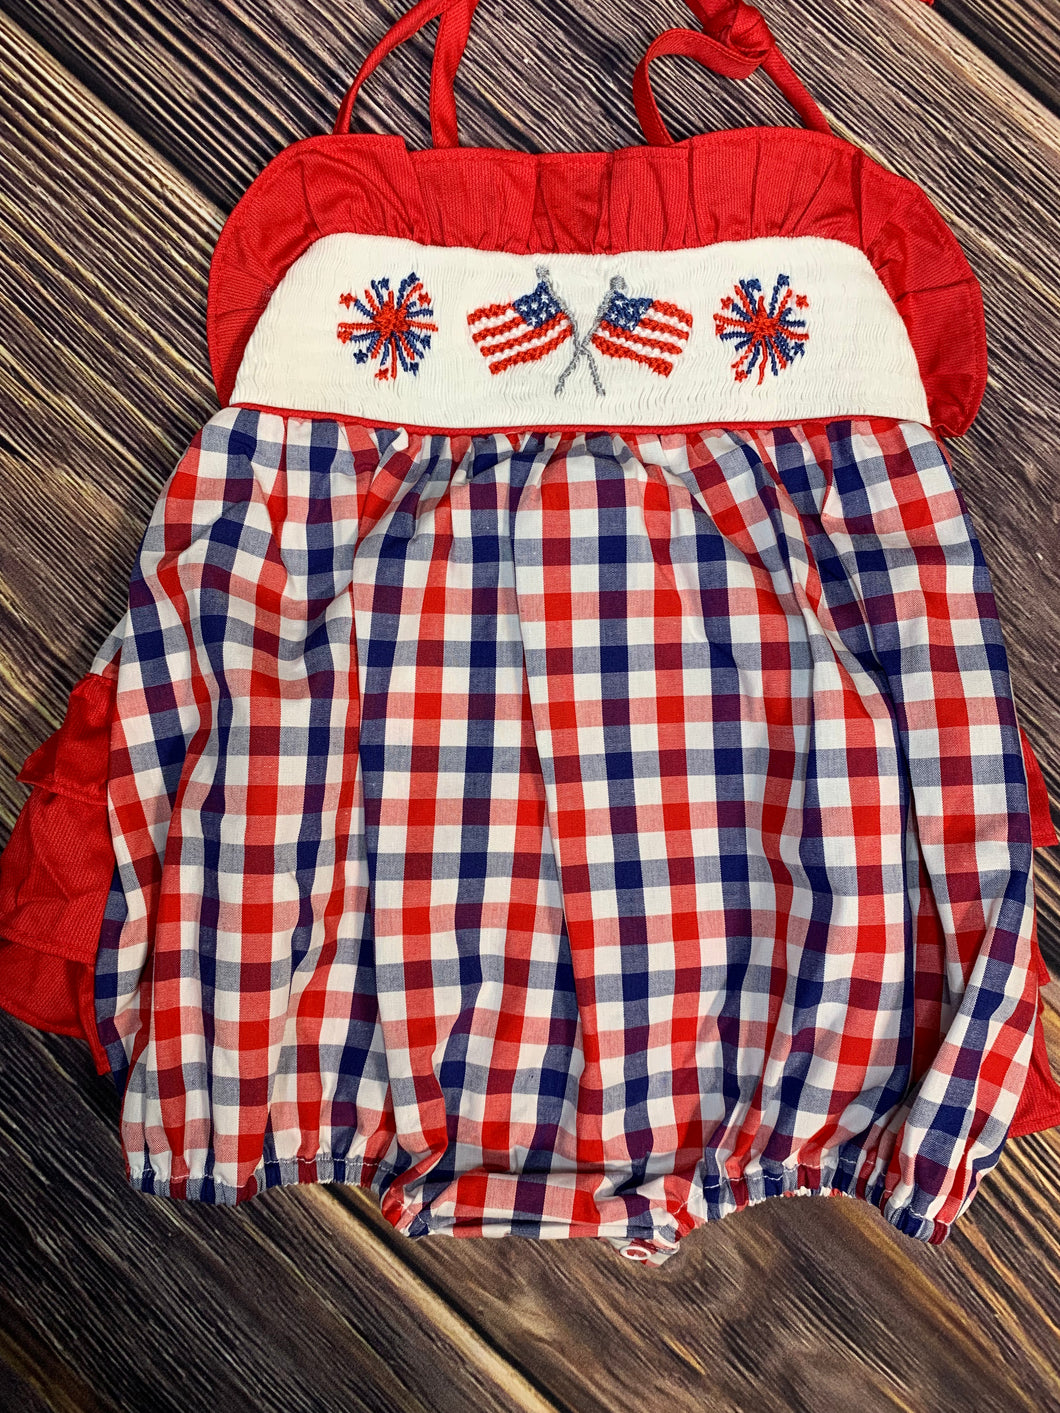 Patriotic Hand Smocked, Ruffled Bubble, Flags and Fireworks